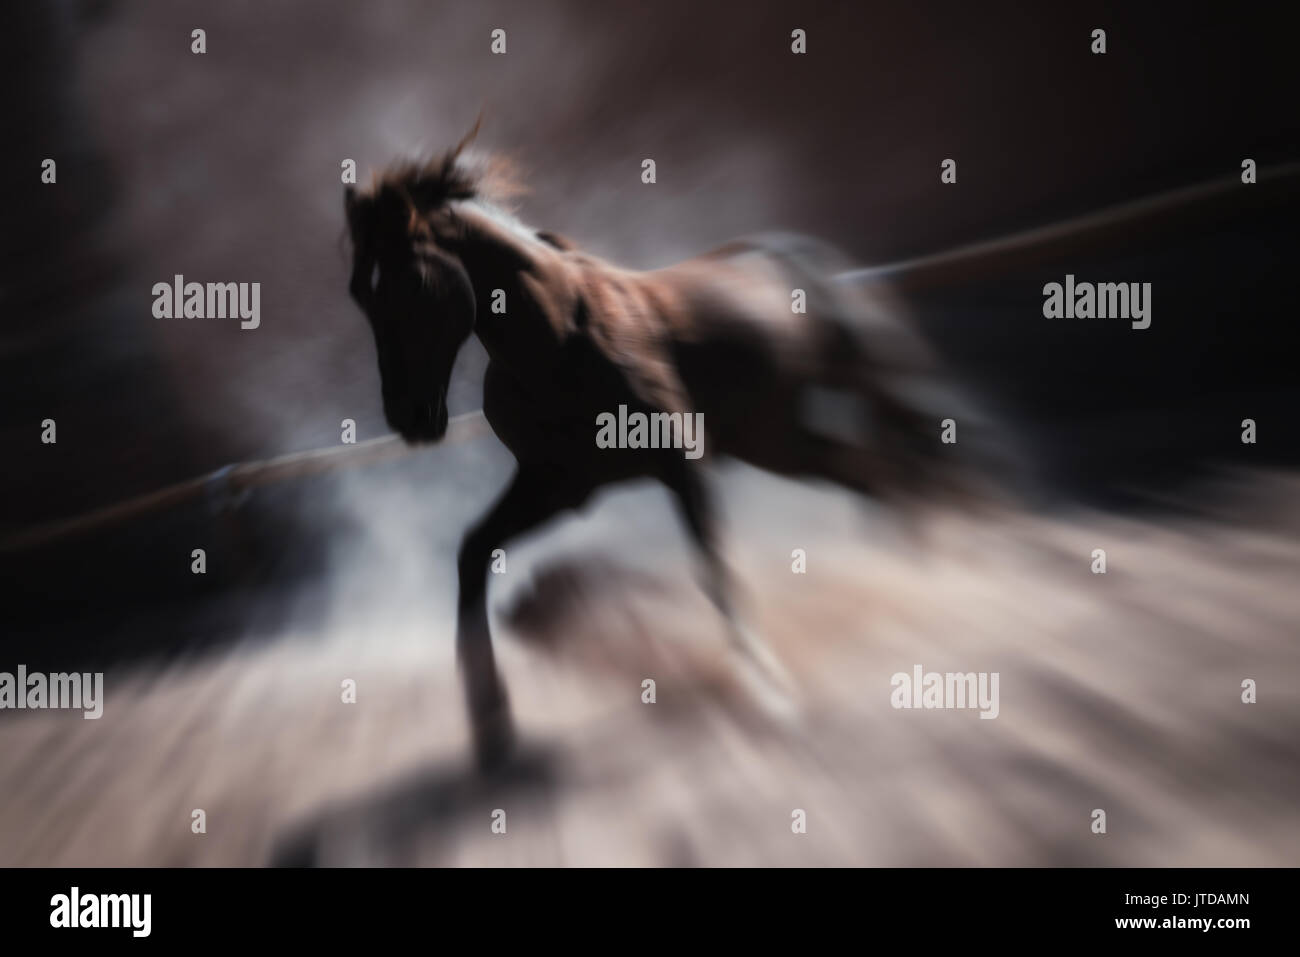 Wild brown stallion horse running and rearing inside a paddock. Artistic low key, blurred, long exposure image. Stock Photo